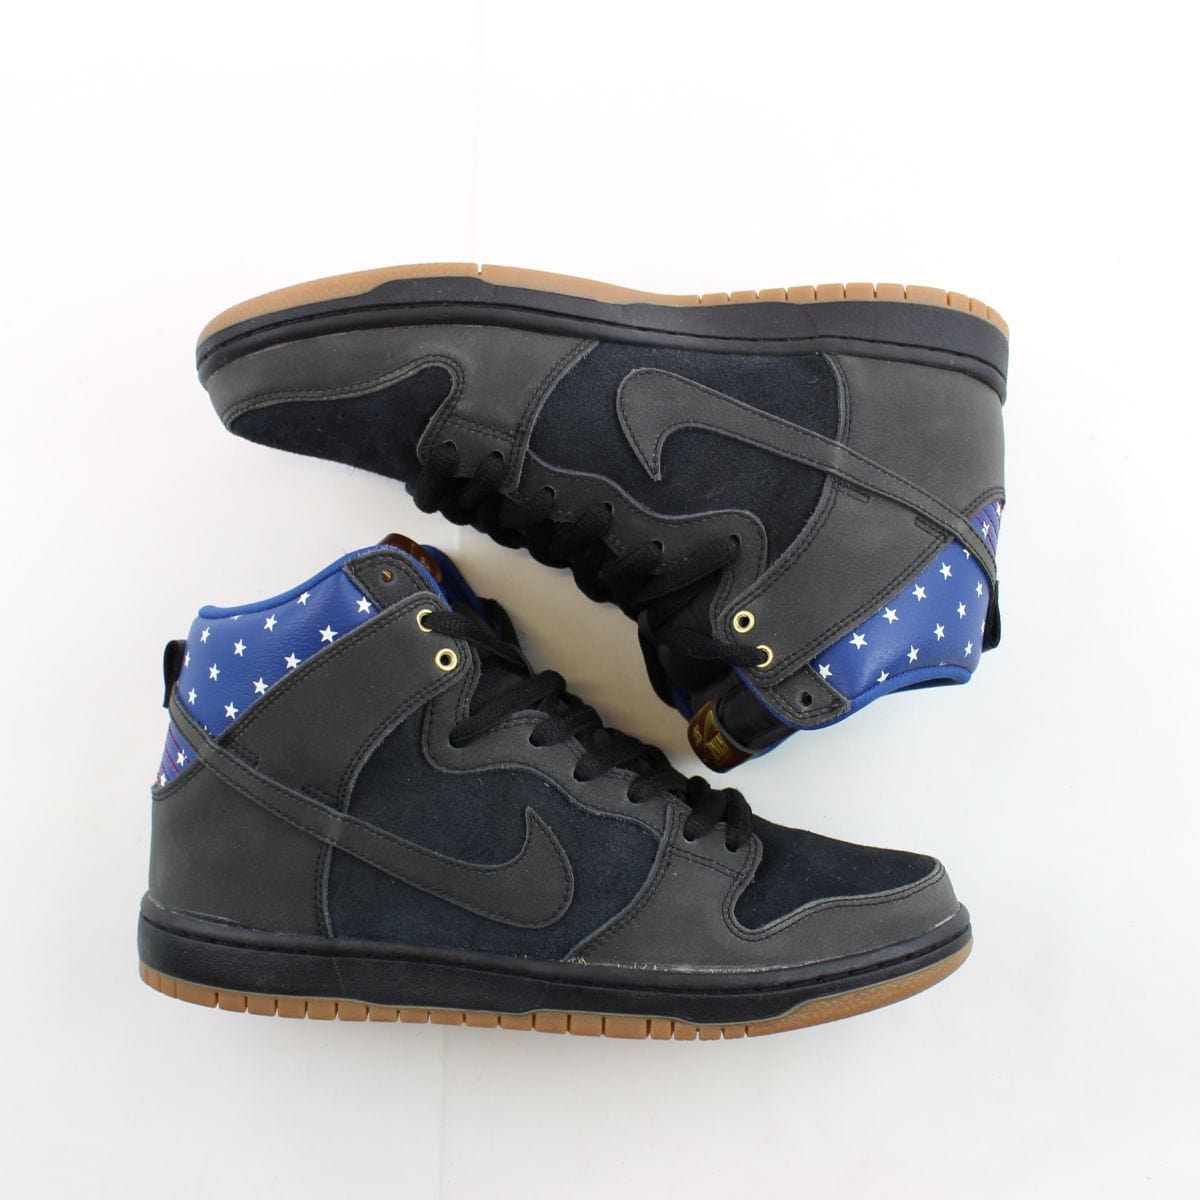 Nike Dunk High captain america - SaruGeneral